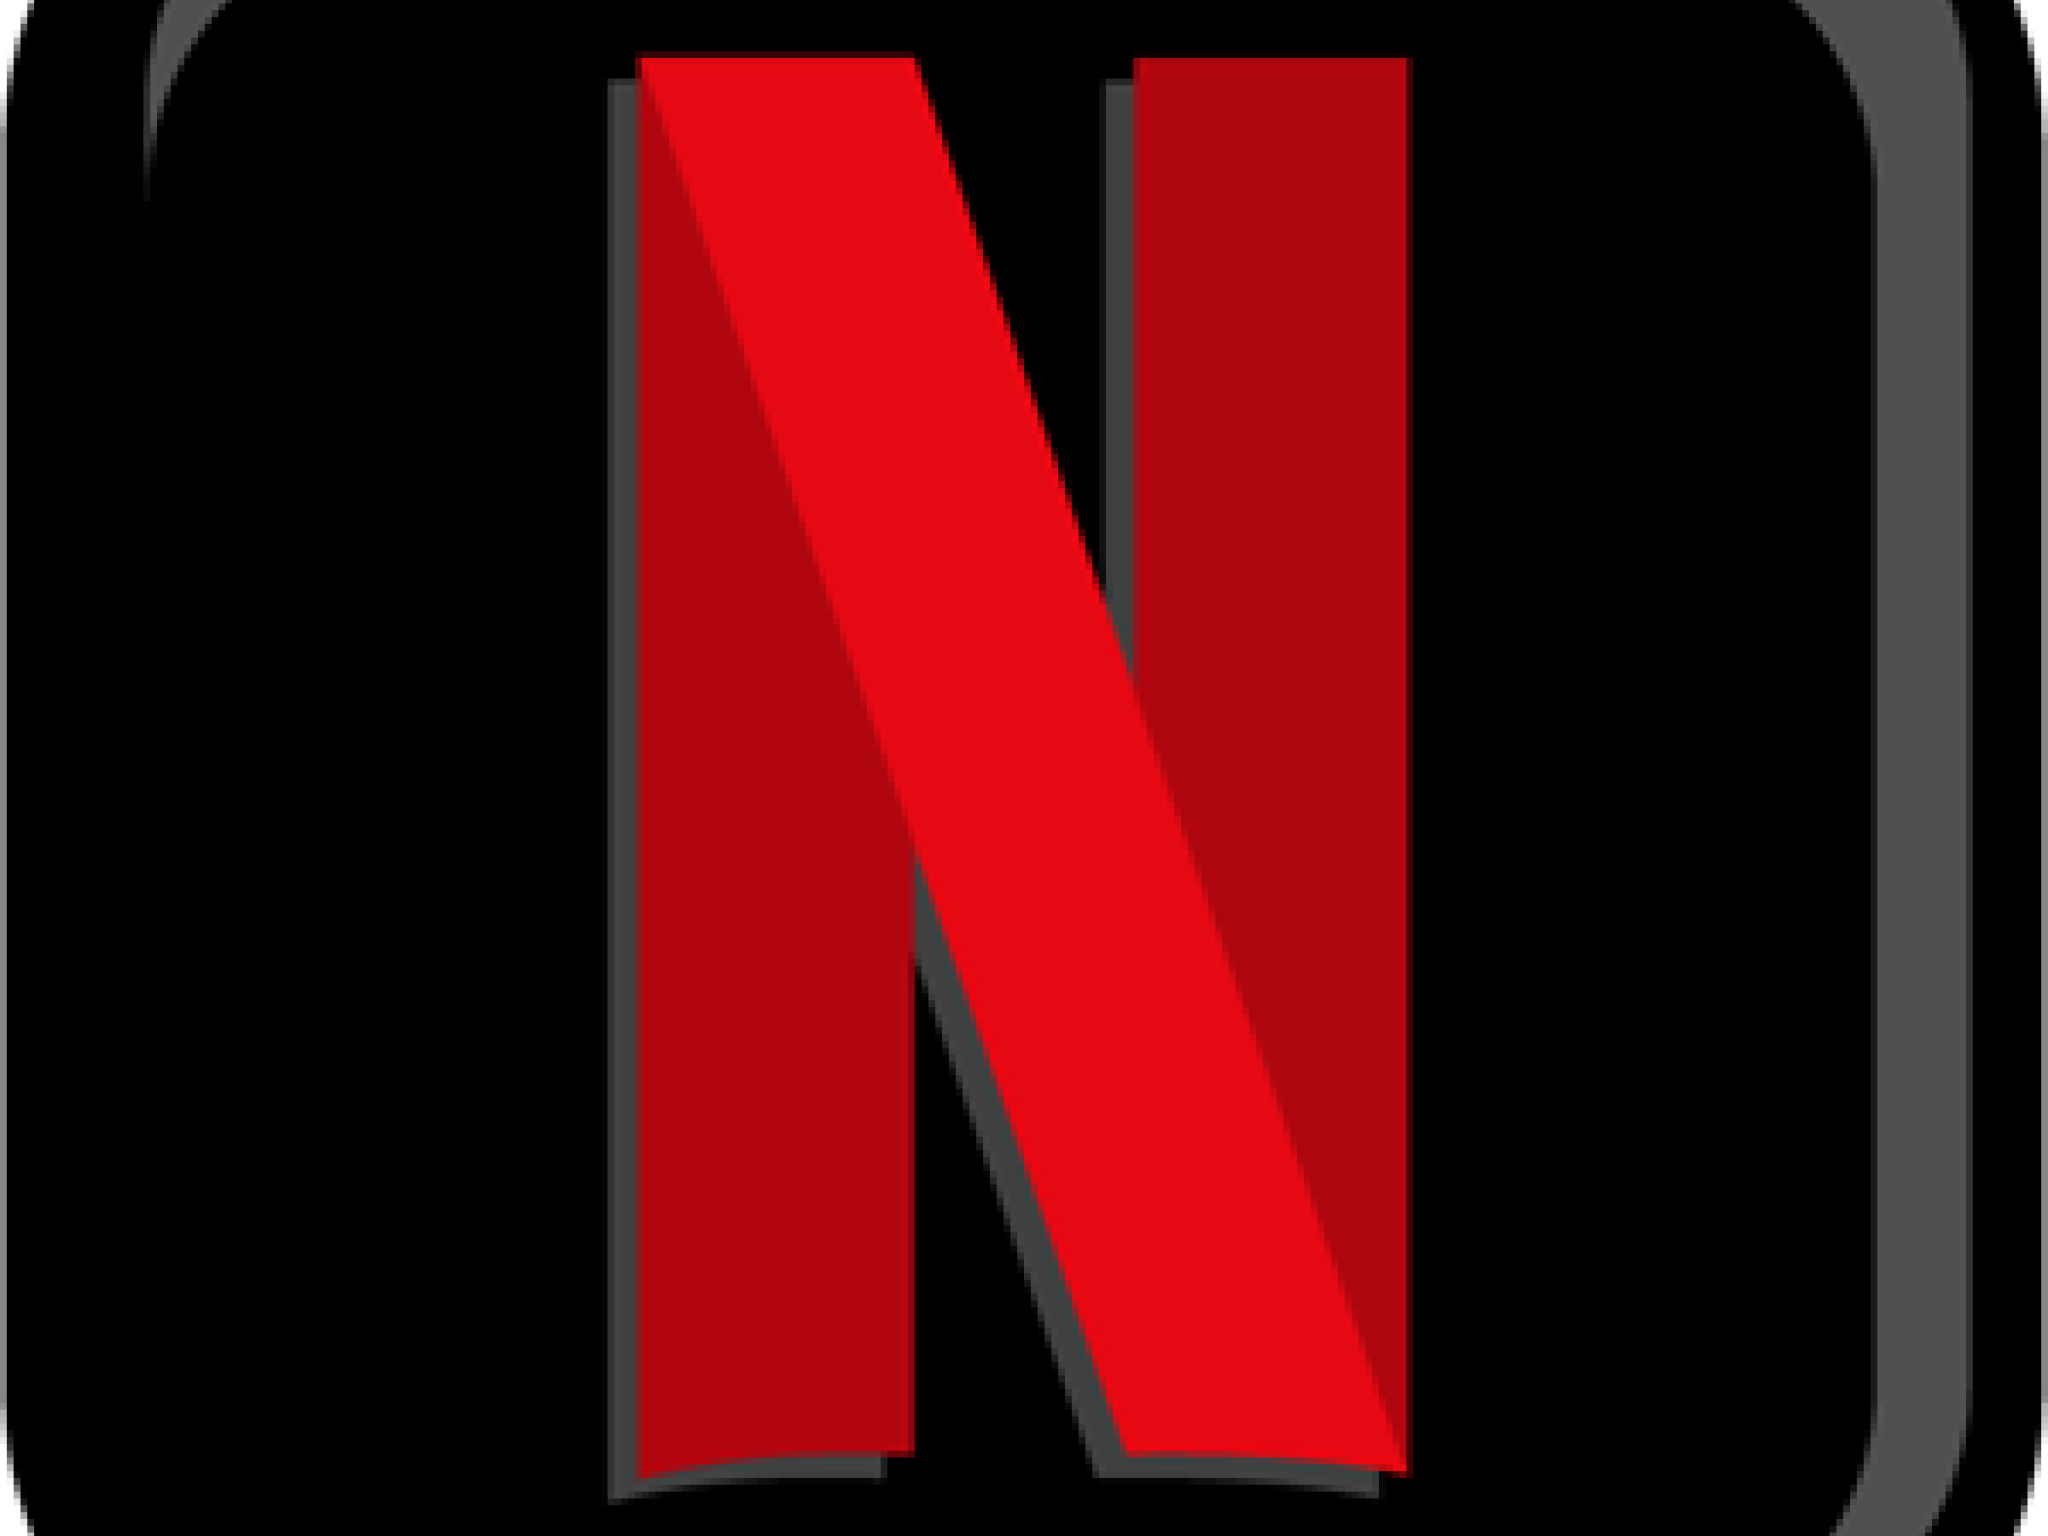  netflix-to-rally-around-18-here-are-10-top-analyst-forecasts-for-wednesday 